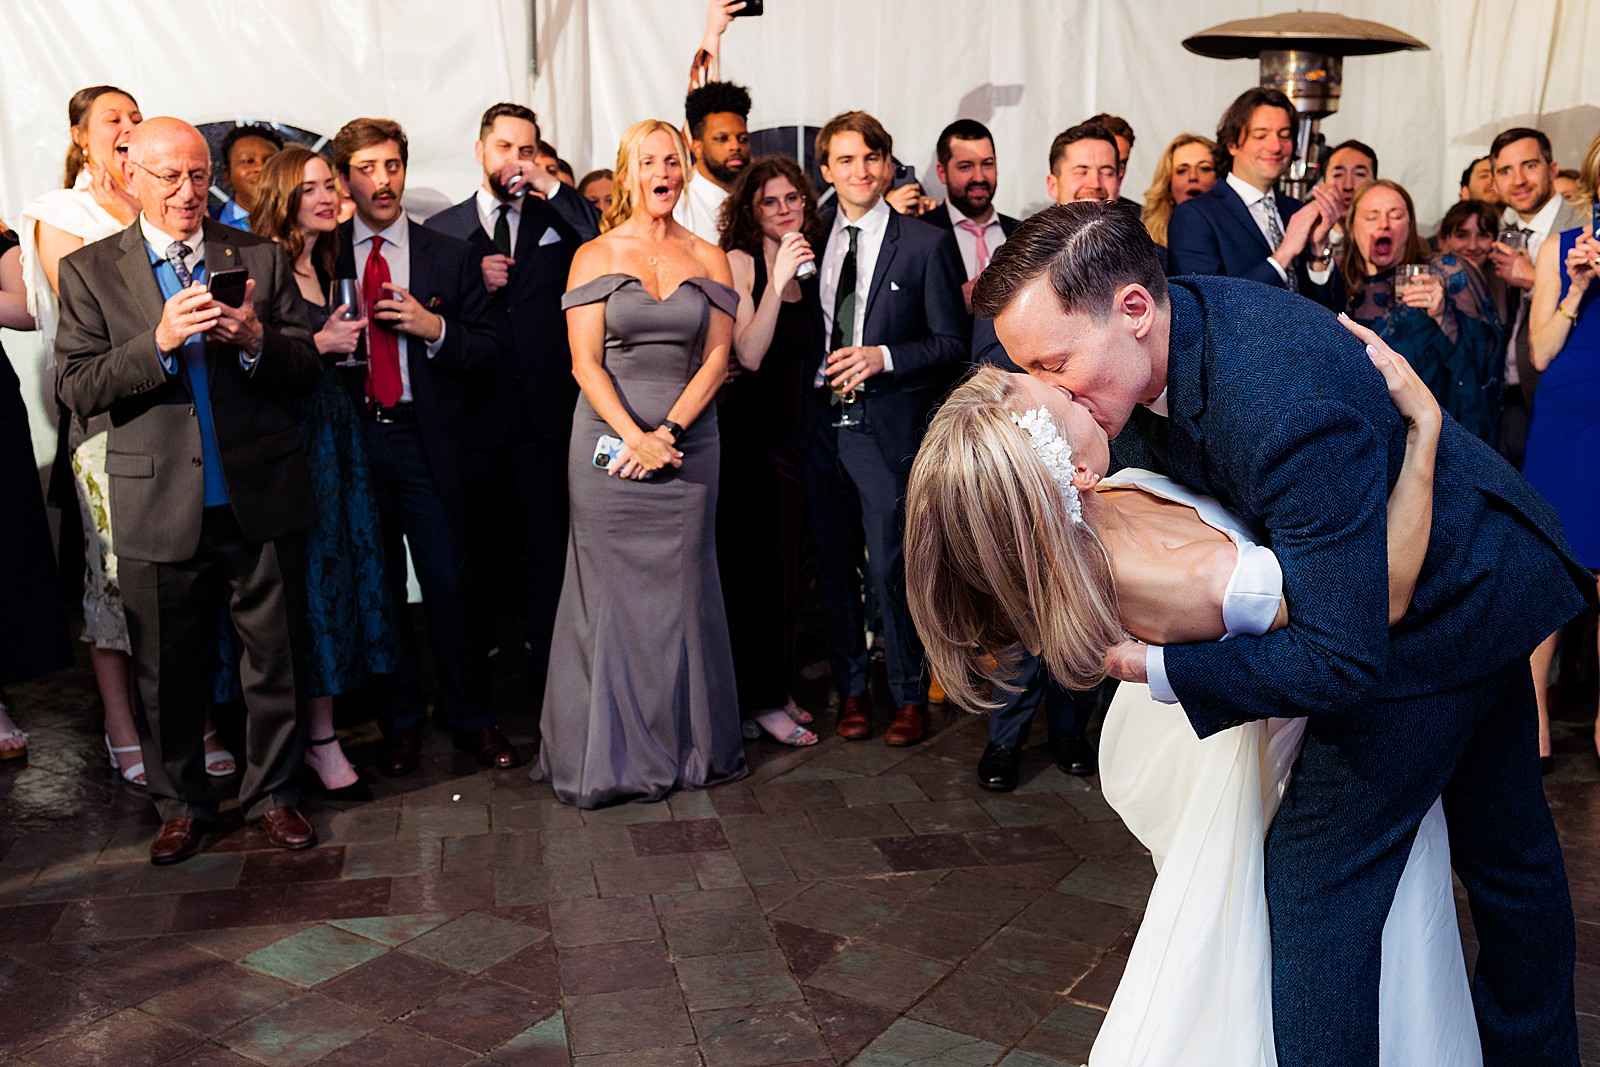 Bride and groom share a first dance in the tent at the Mount Vernon Inn Restaurant.